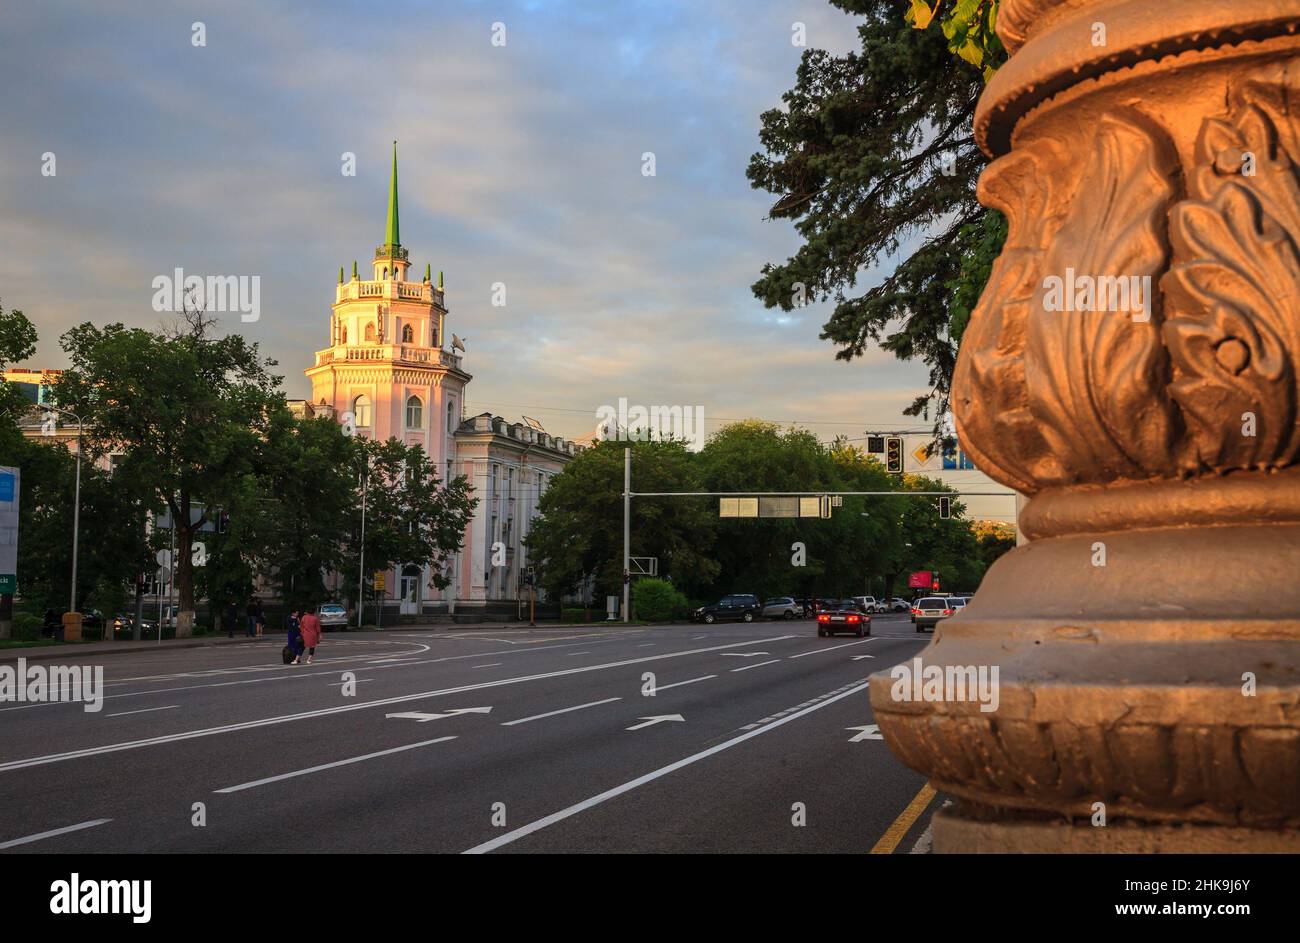 Old square in Almaty at evening/Almaty, Kazakhstan - May 6, 2017; People and cars are moving along the street Stock Photo